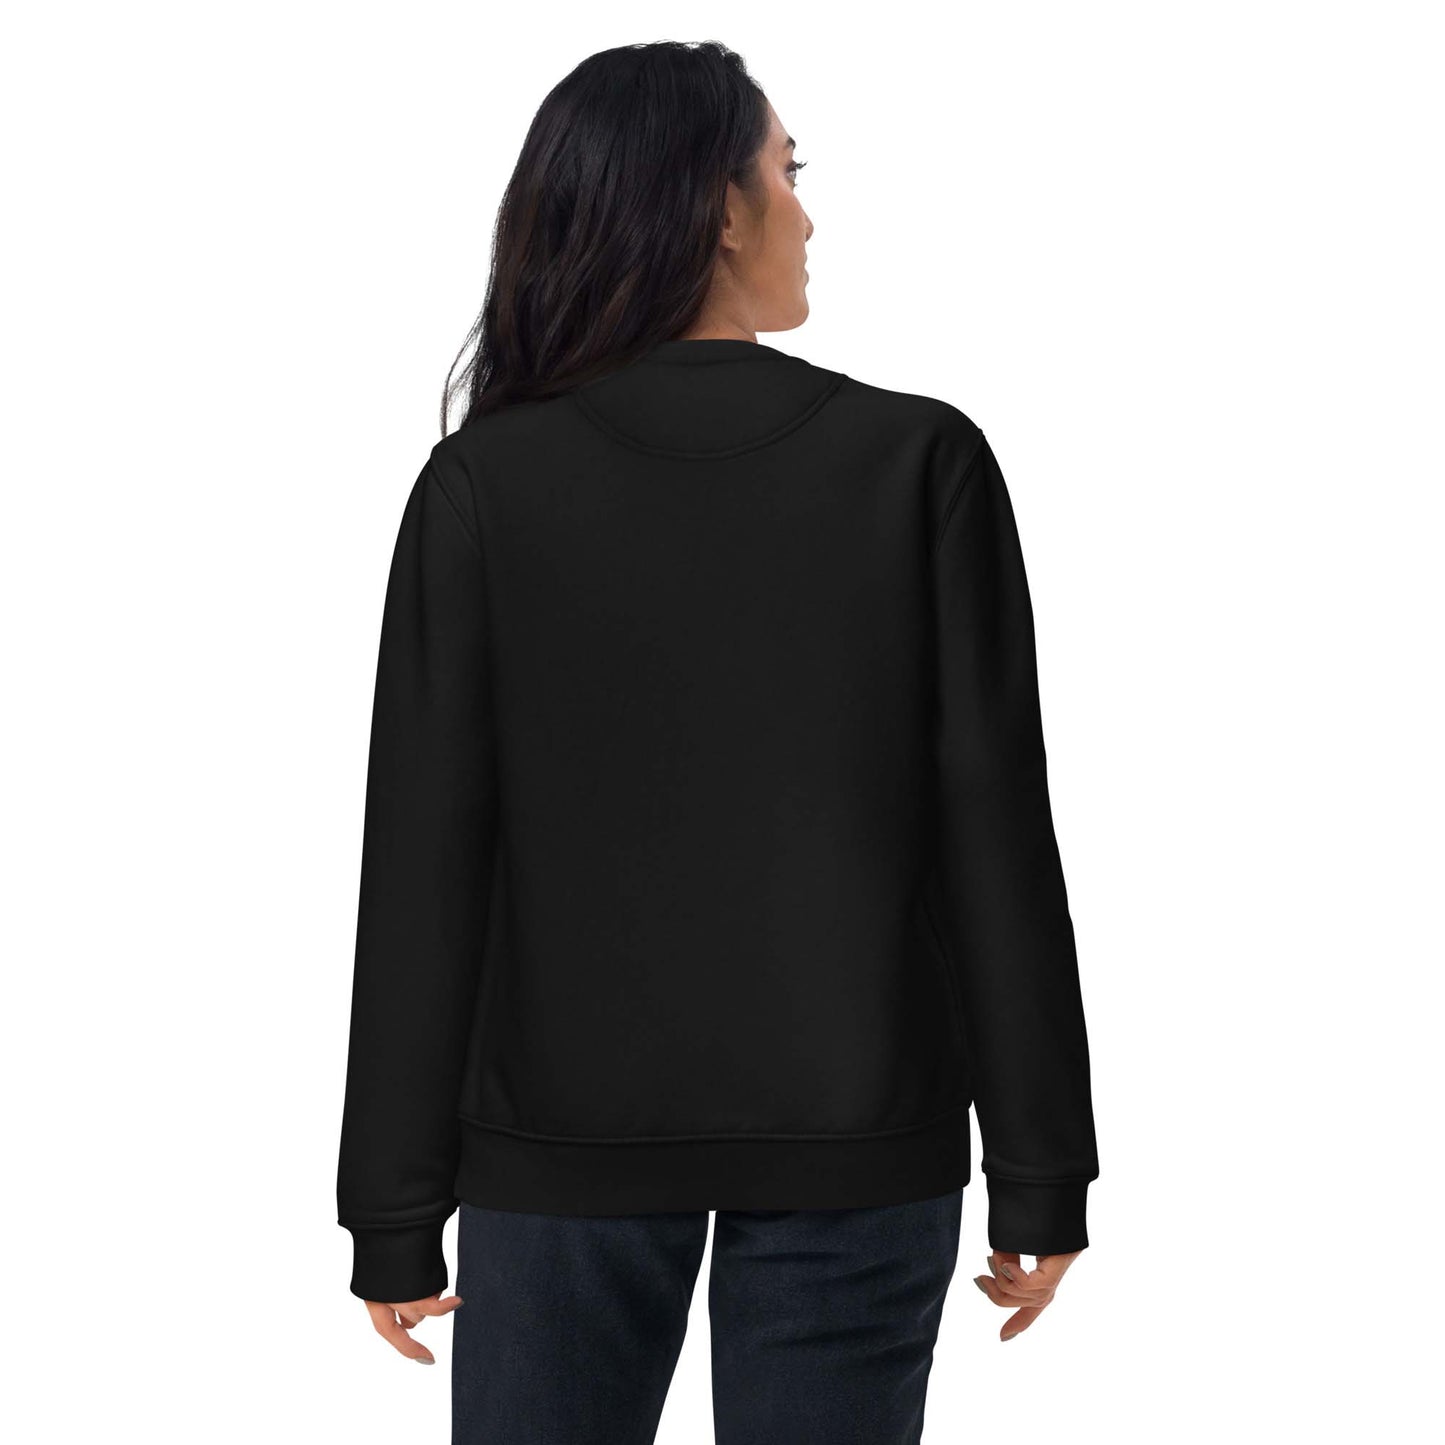 Women black inspirational sweatshirt with Barack Obama's inspirational quote, "Yes We Can." 